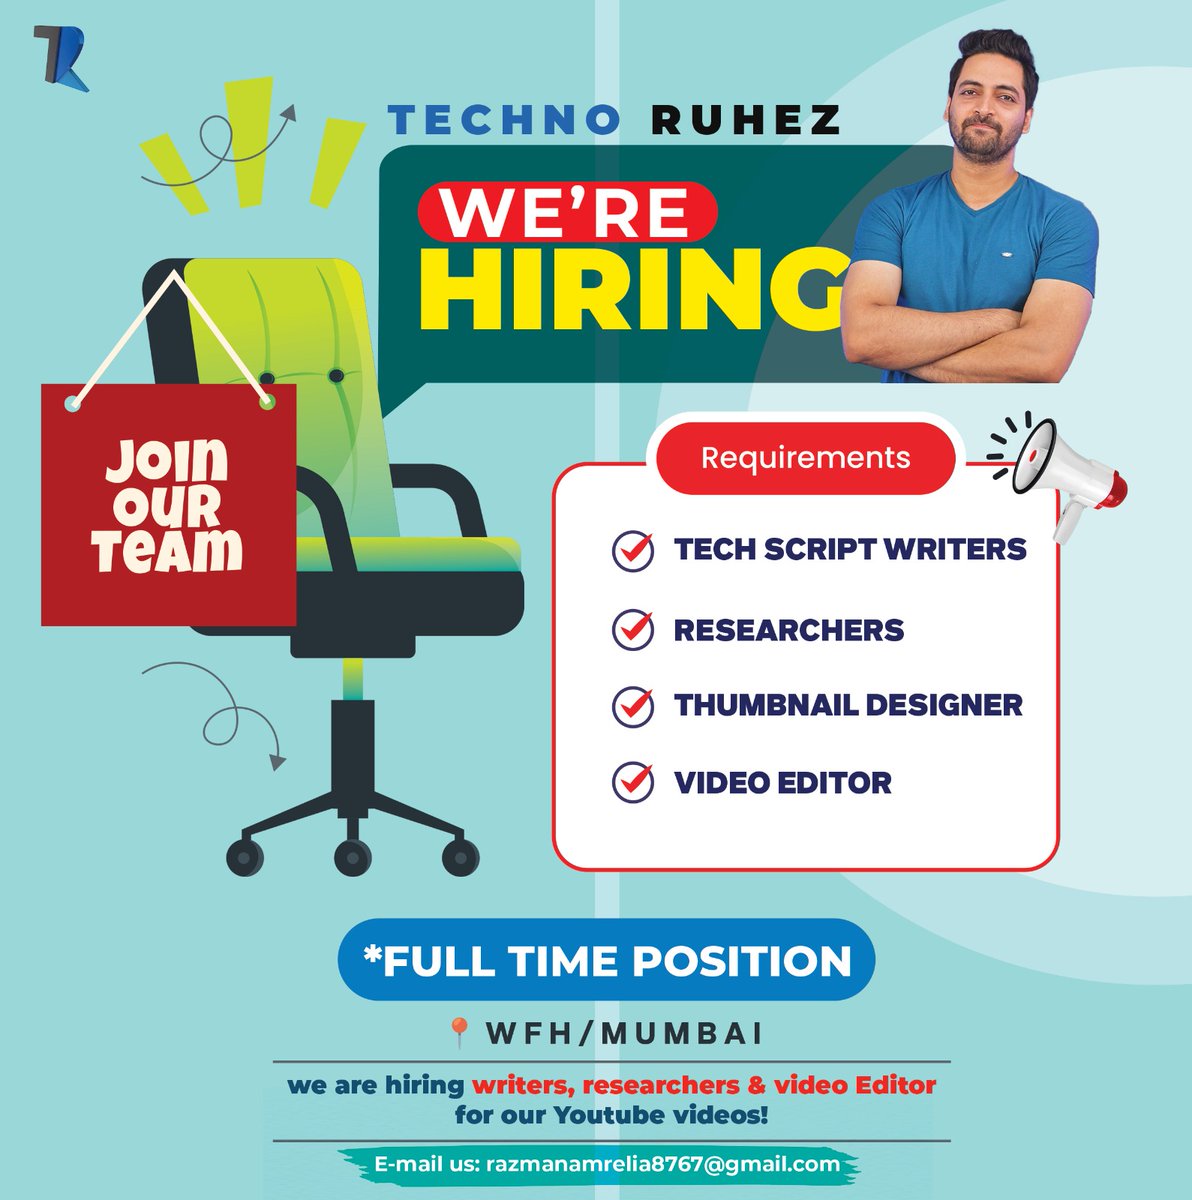 We are Hiring For Full Time Please email Your CV if You are based in Mumbai !